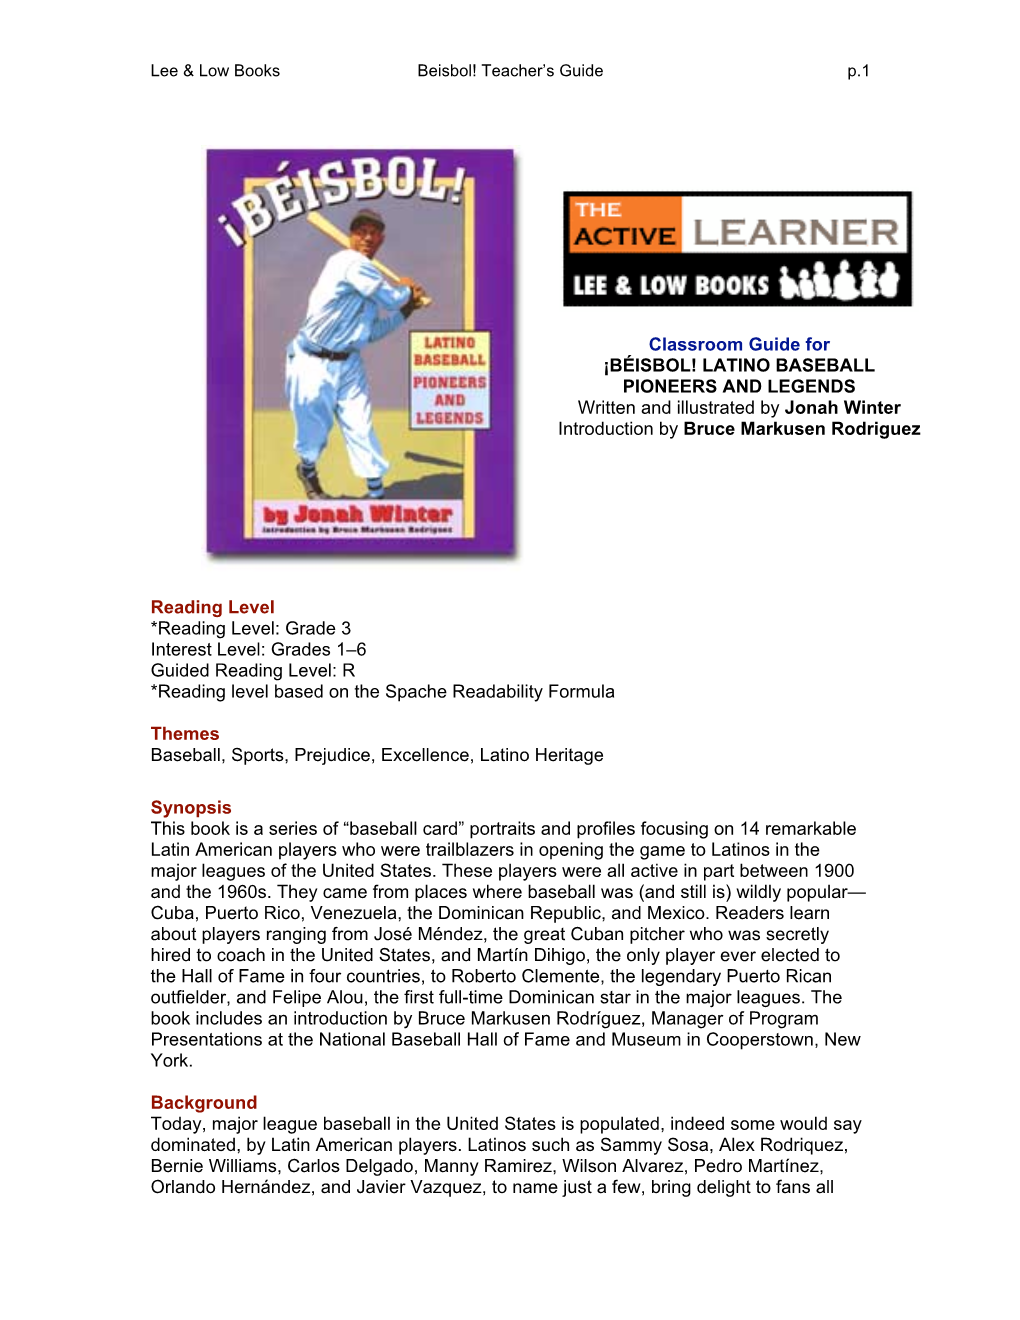 Classroom Guide for ¡BÉISBOL! LATINO BASEBALL PIONEERS and LEGENDS Written and Illustrated by Jonah Winter Introduction by Bruce Markusen Rodriguez